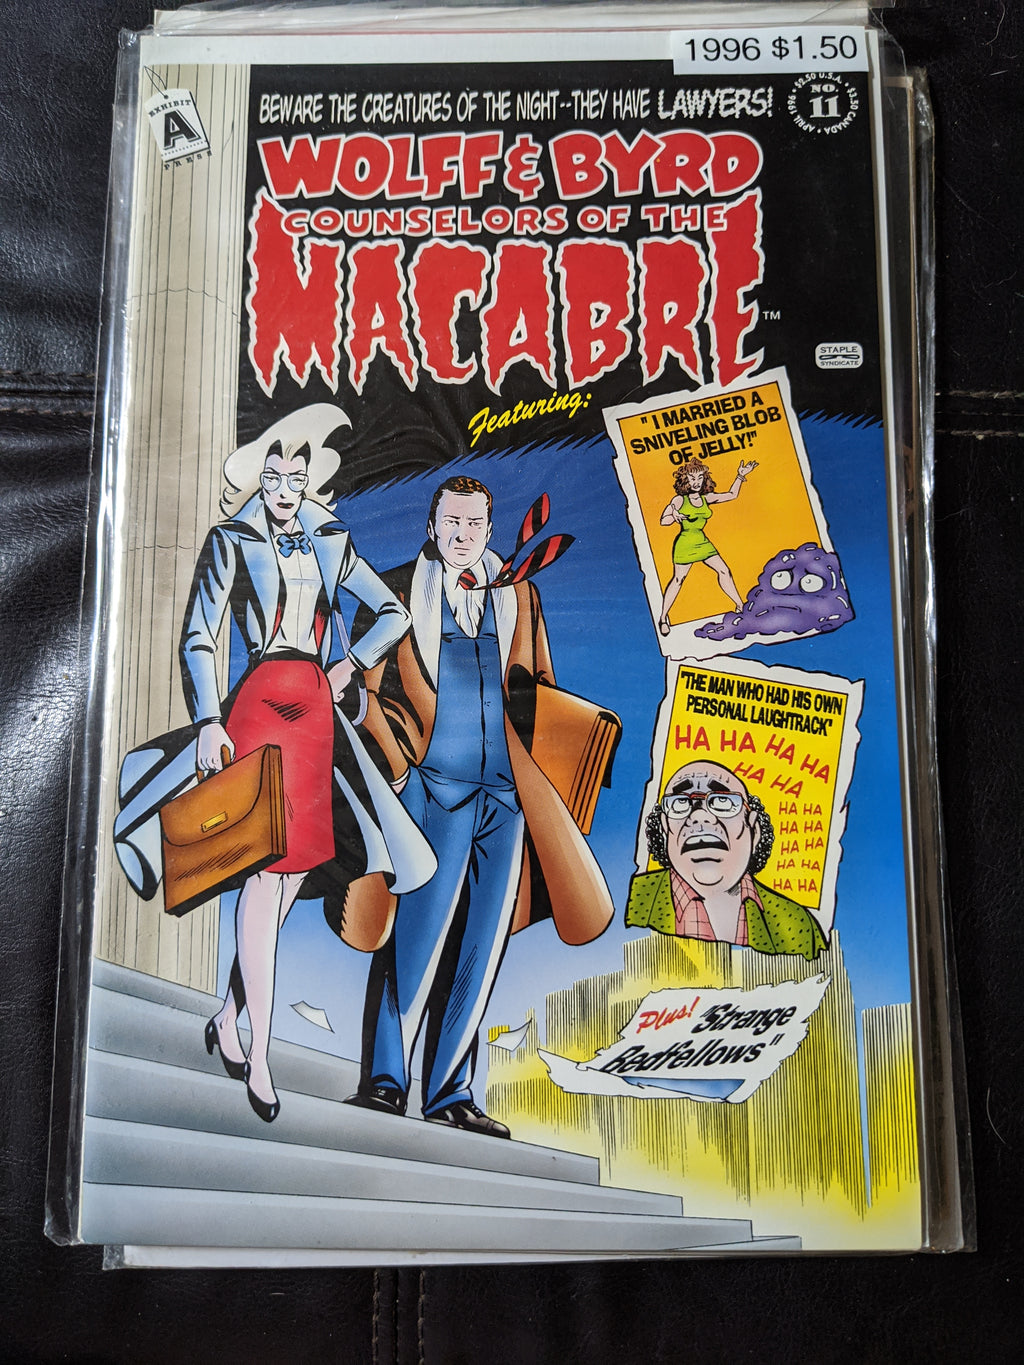 Wolff & Byrd Counselors of the Macabre #11 Comicbook Horror